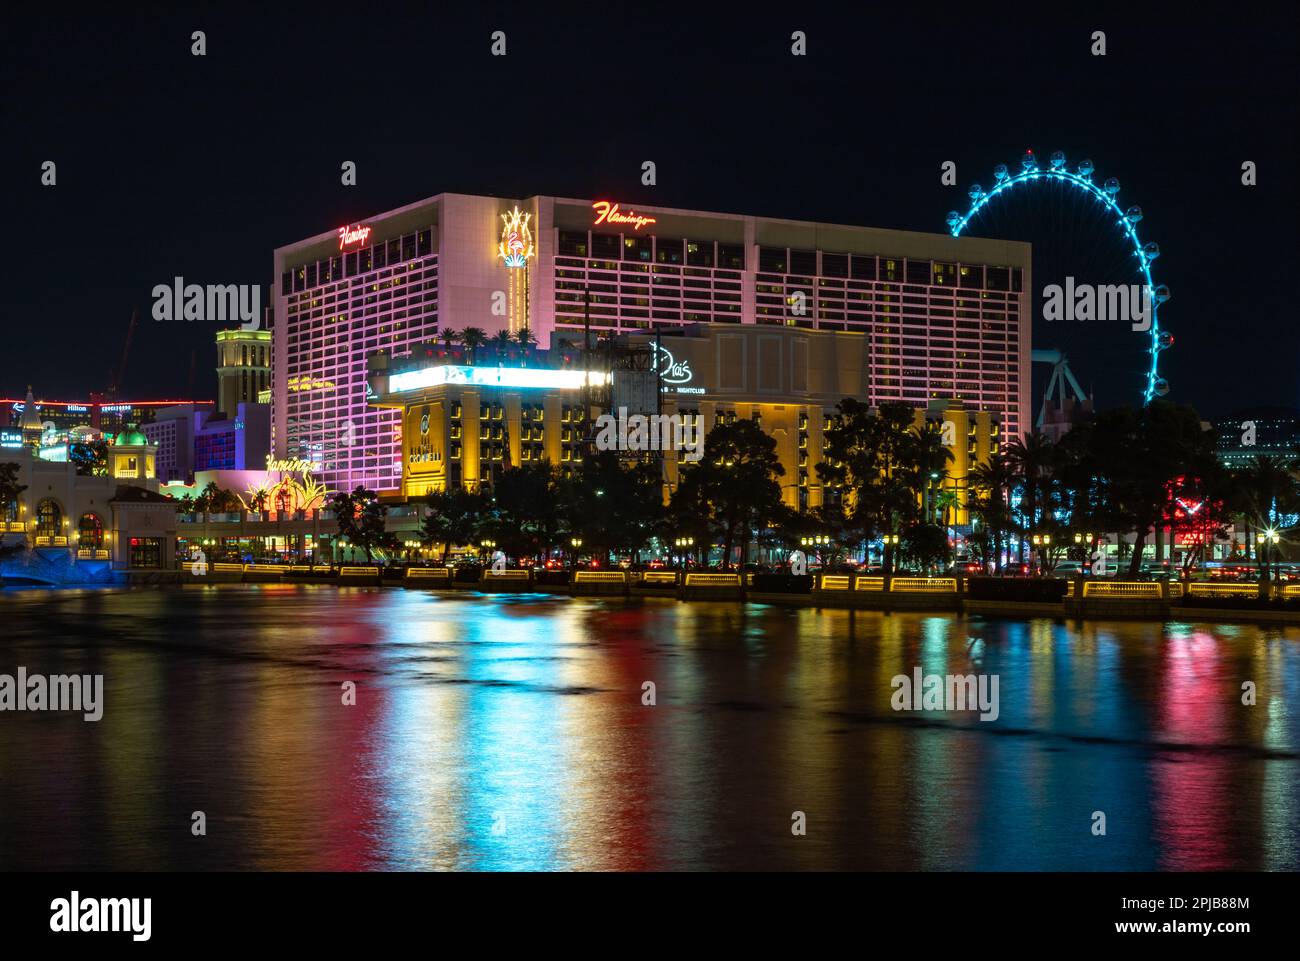 A picture of the Flamingo Las Vegas Hotel and Casino at night, reflected on the Bellagio Fountain. Stock Photo